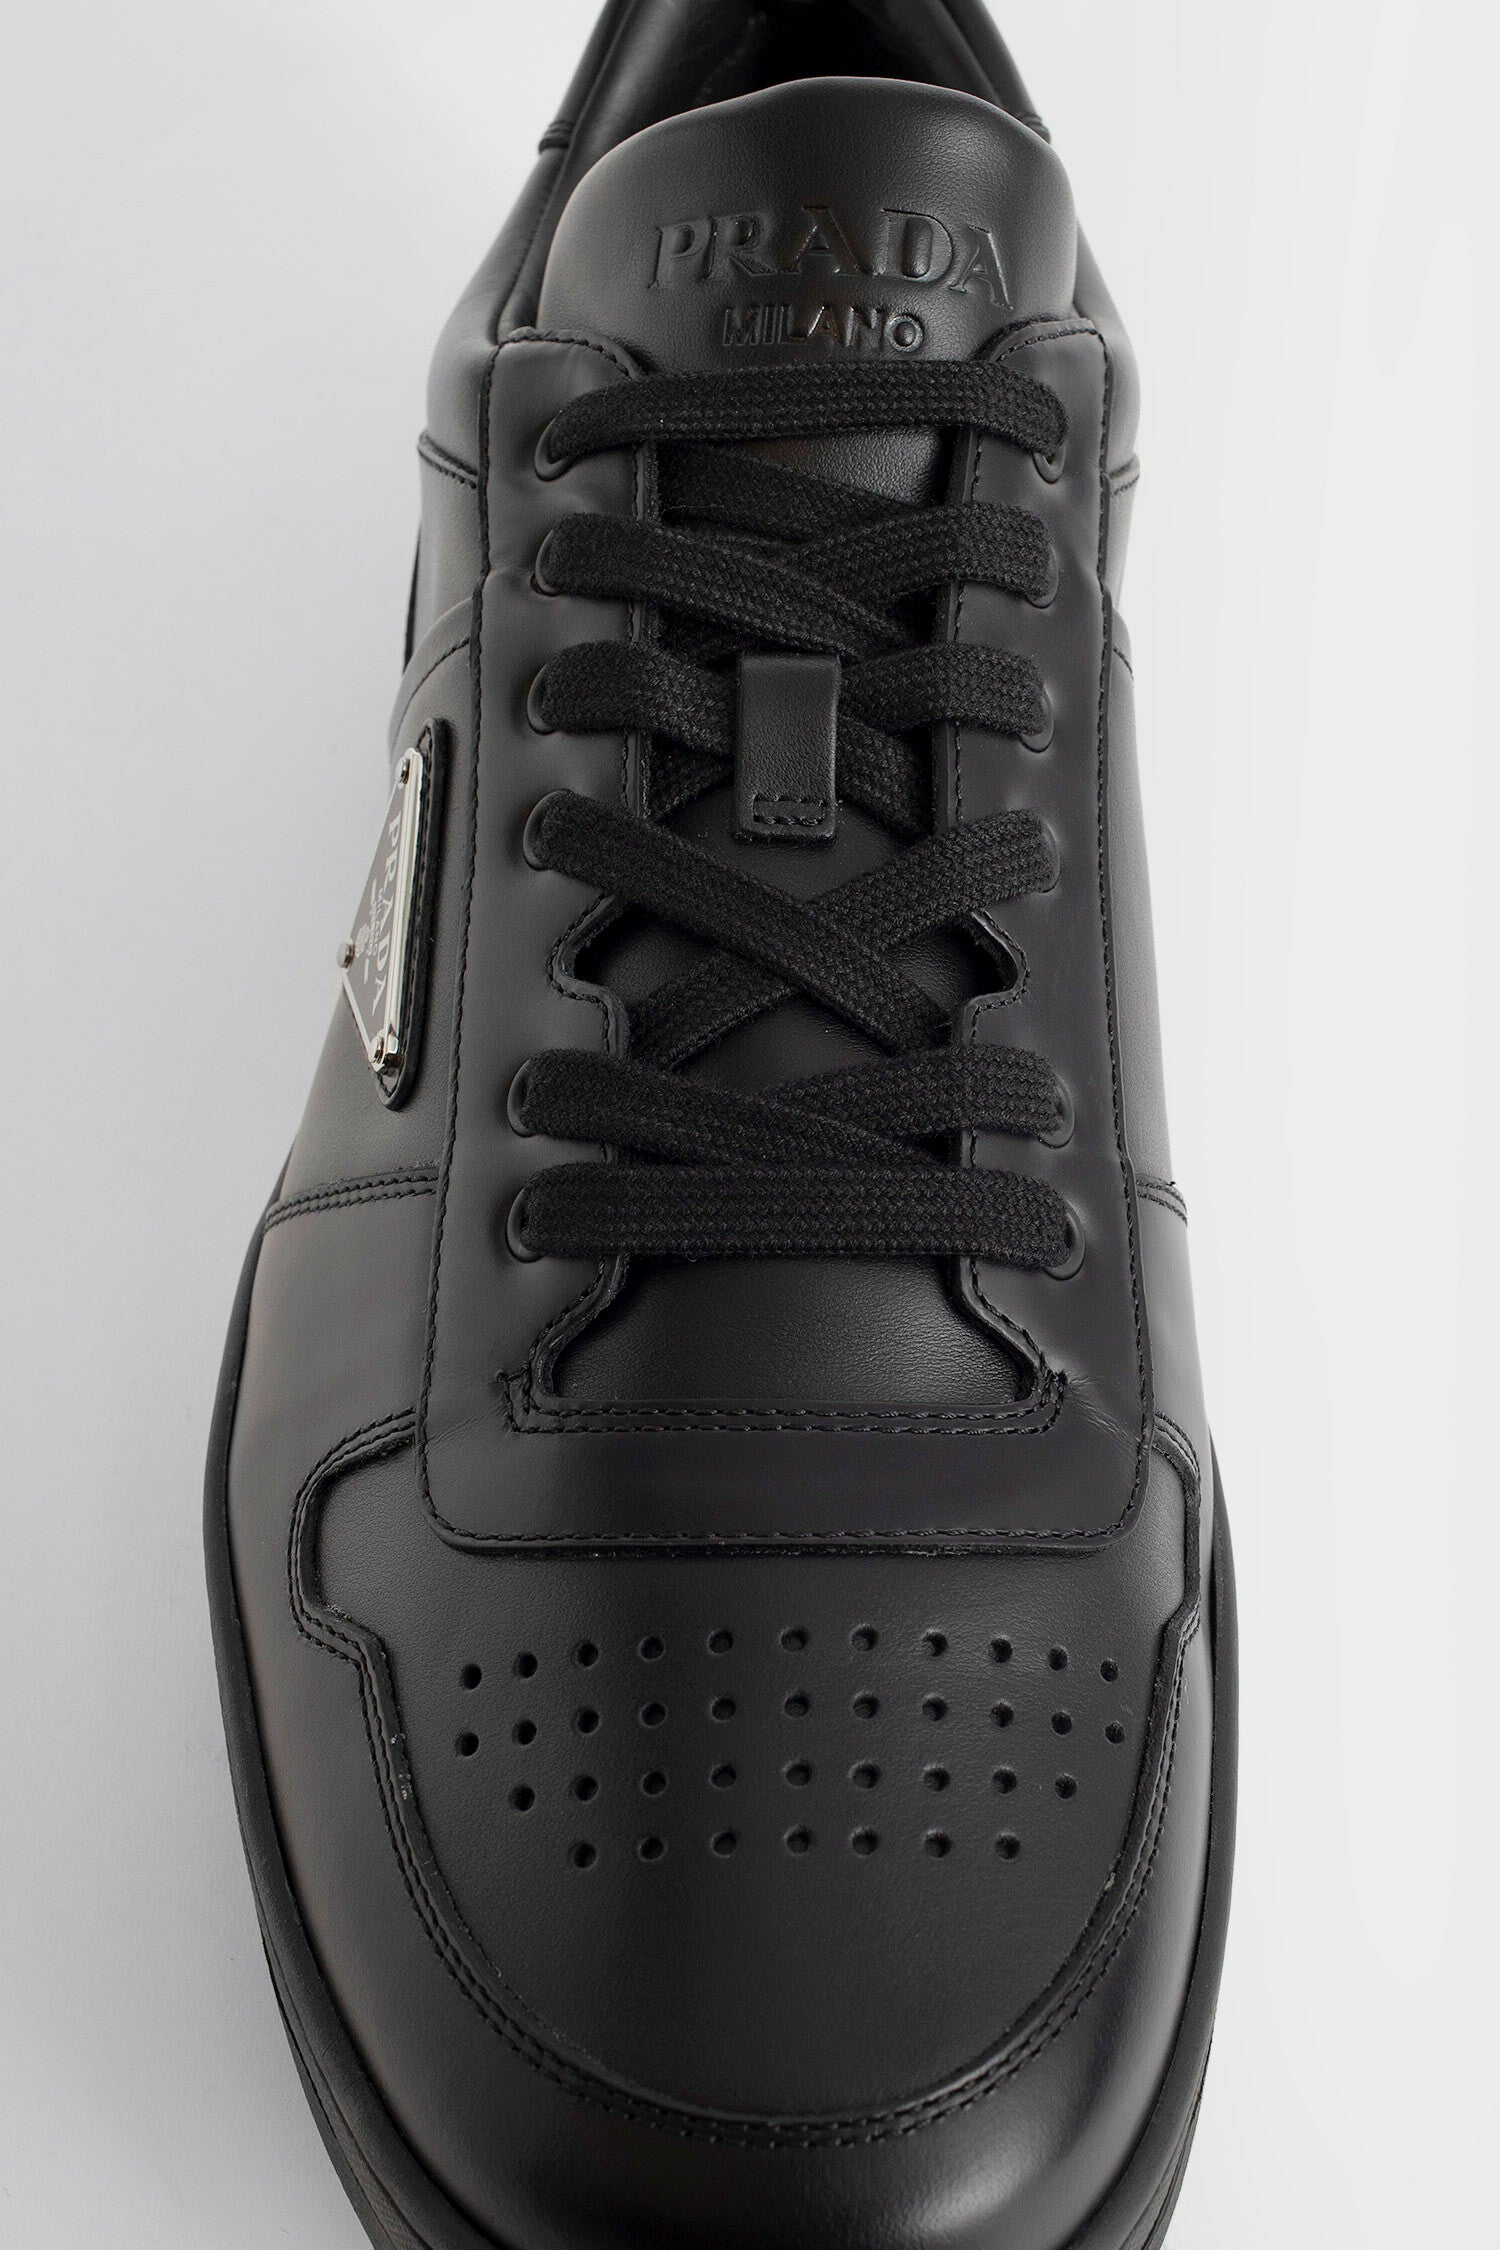 Prada Sneakers - Men's 7 | Fashionably Yours